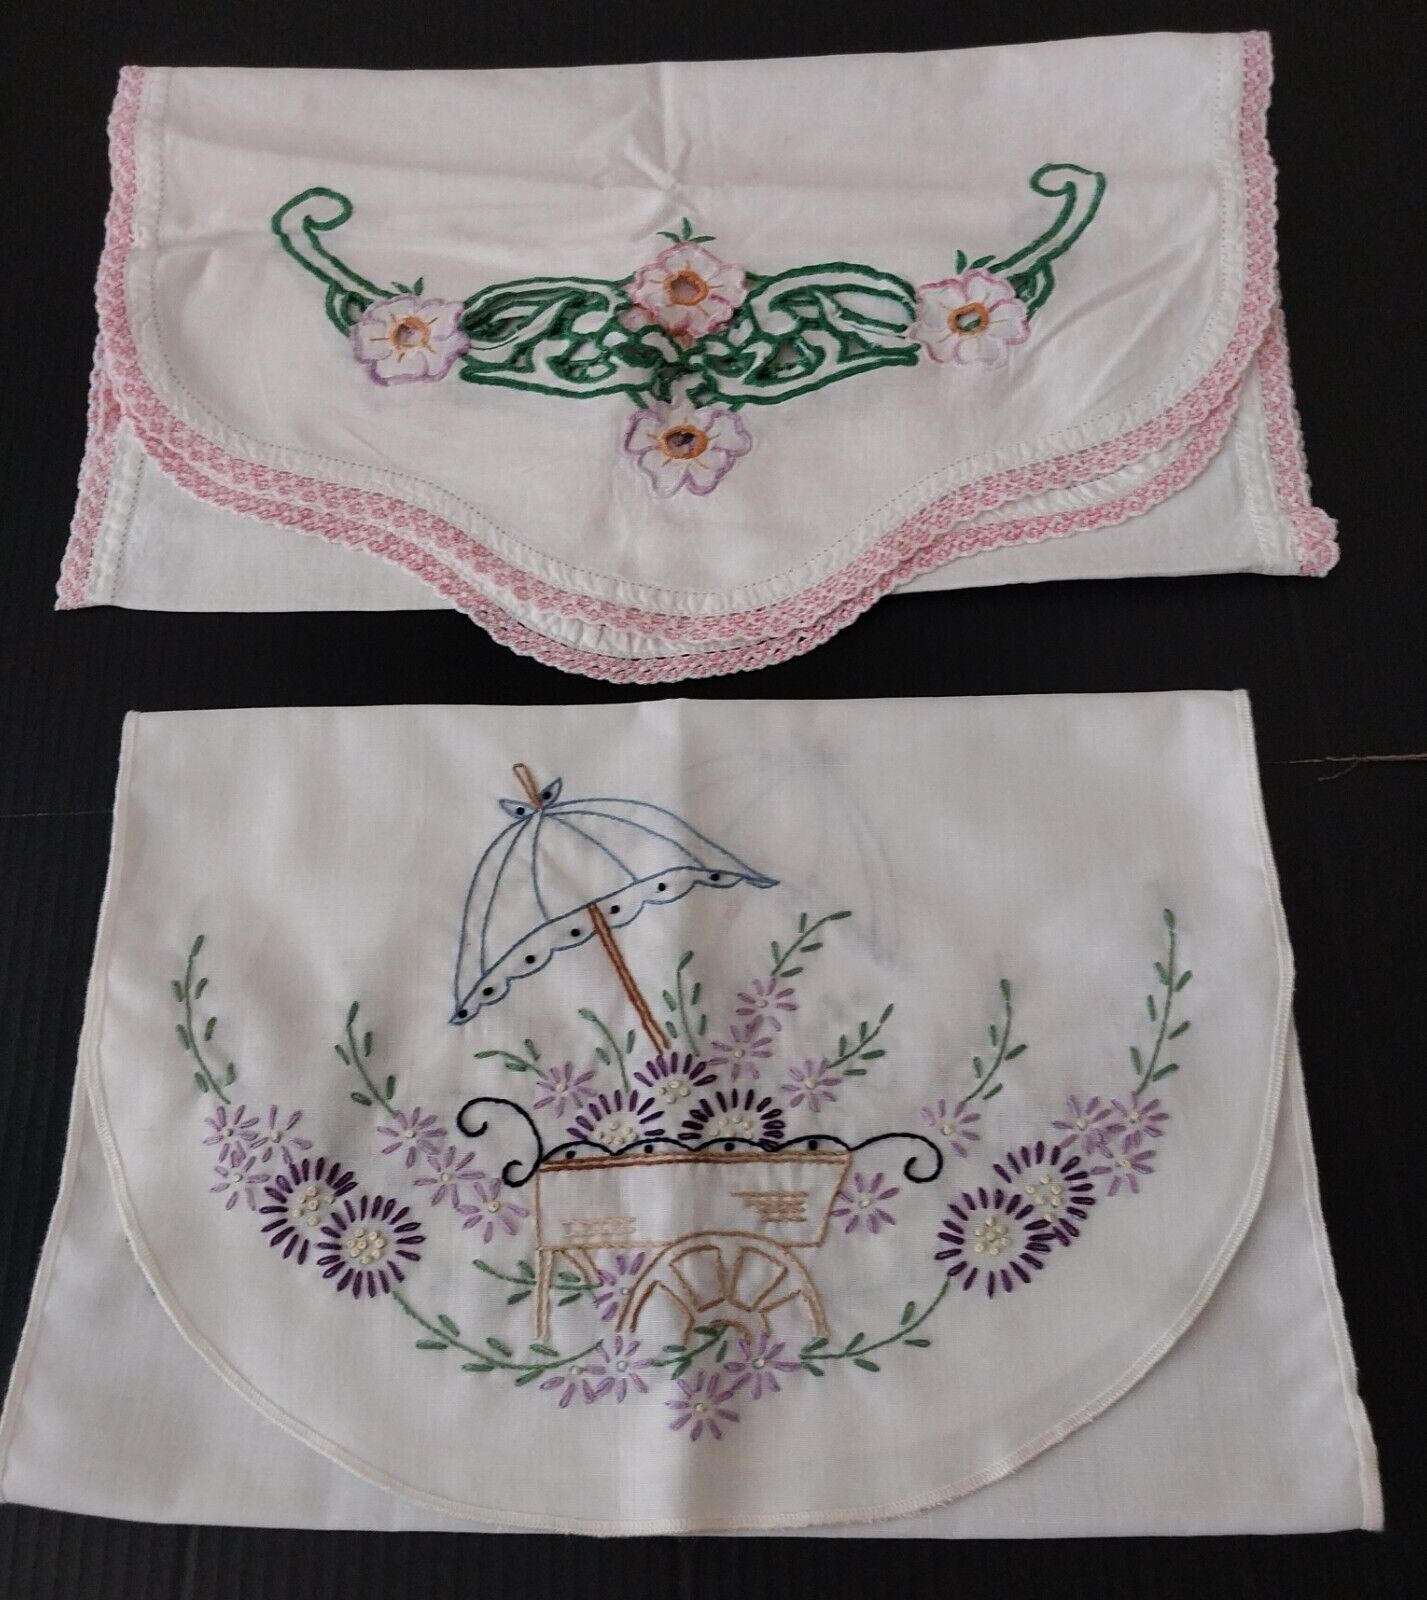 VTG Lot of 2 Handcrafted Table Runners / Dresser Scarf*Embroidered & Applique